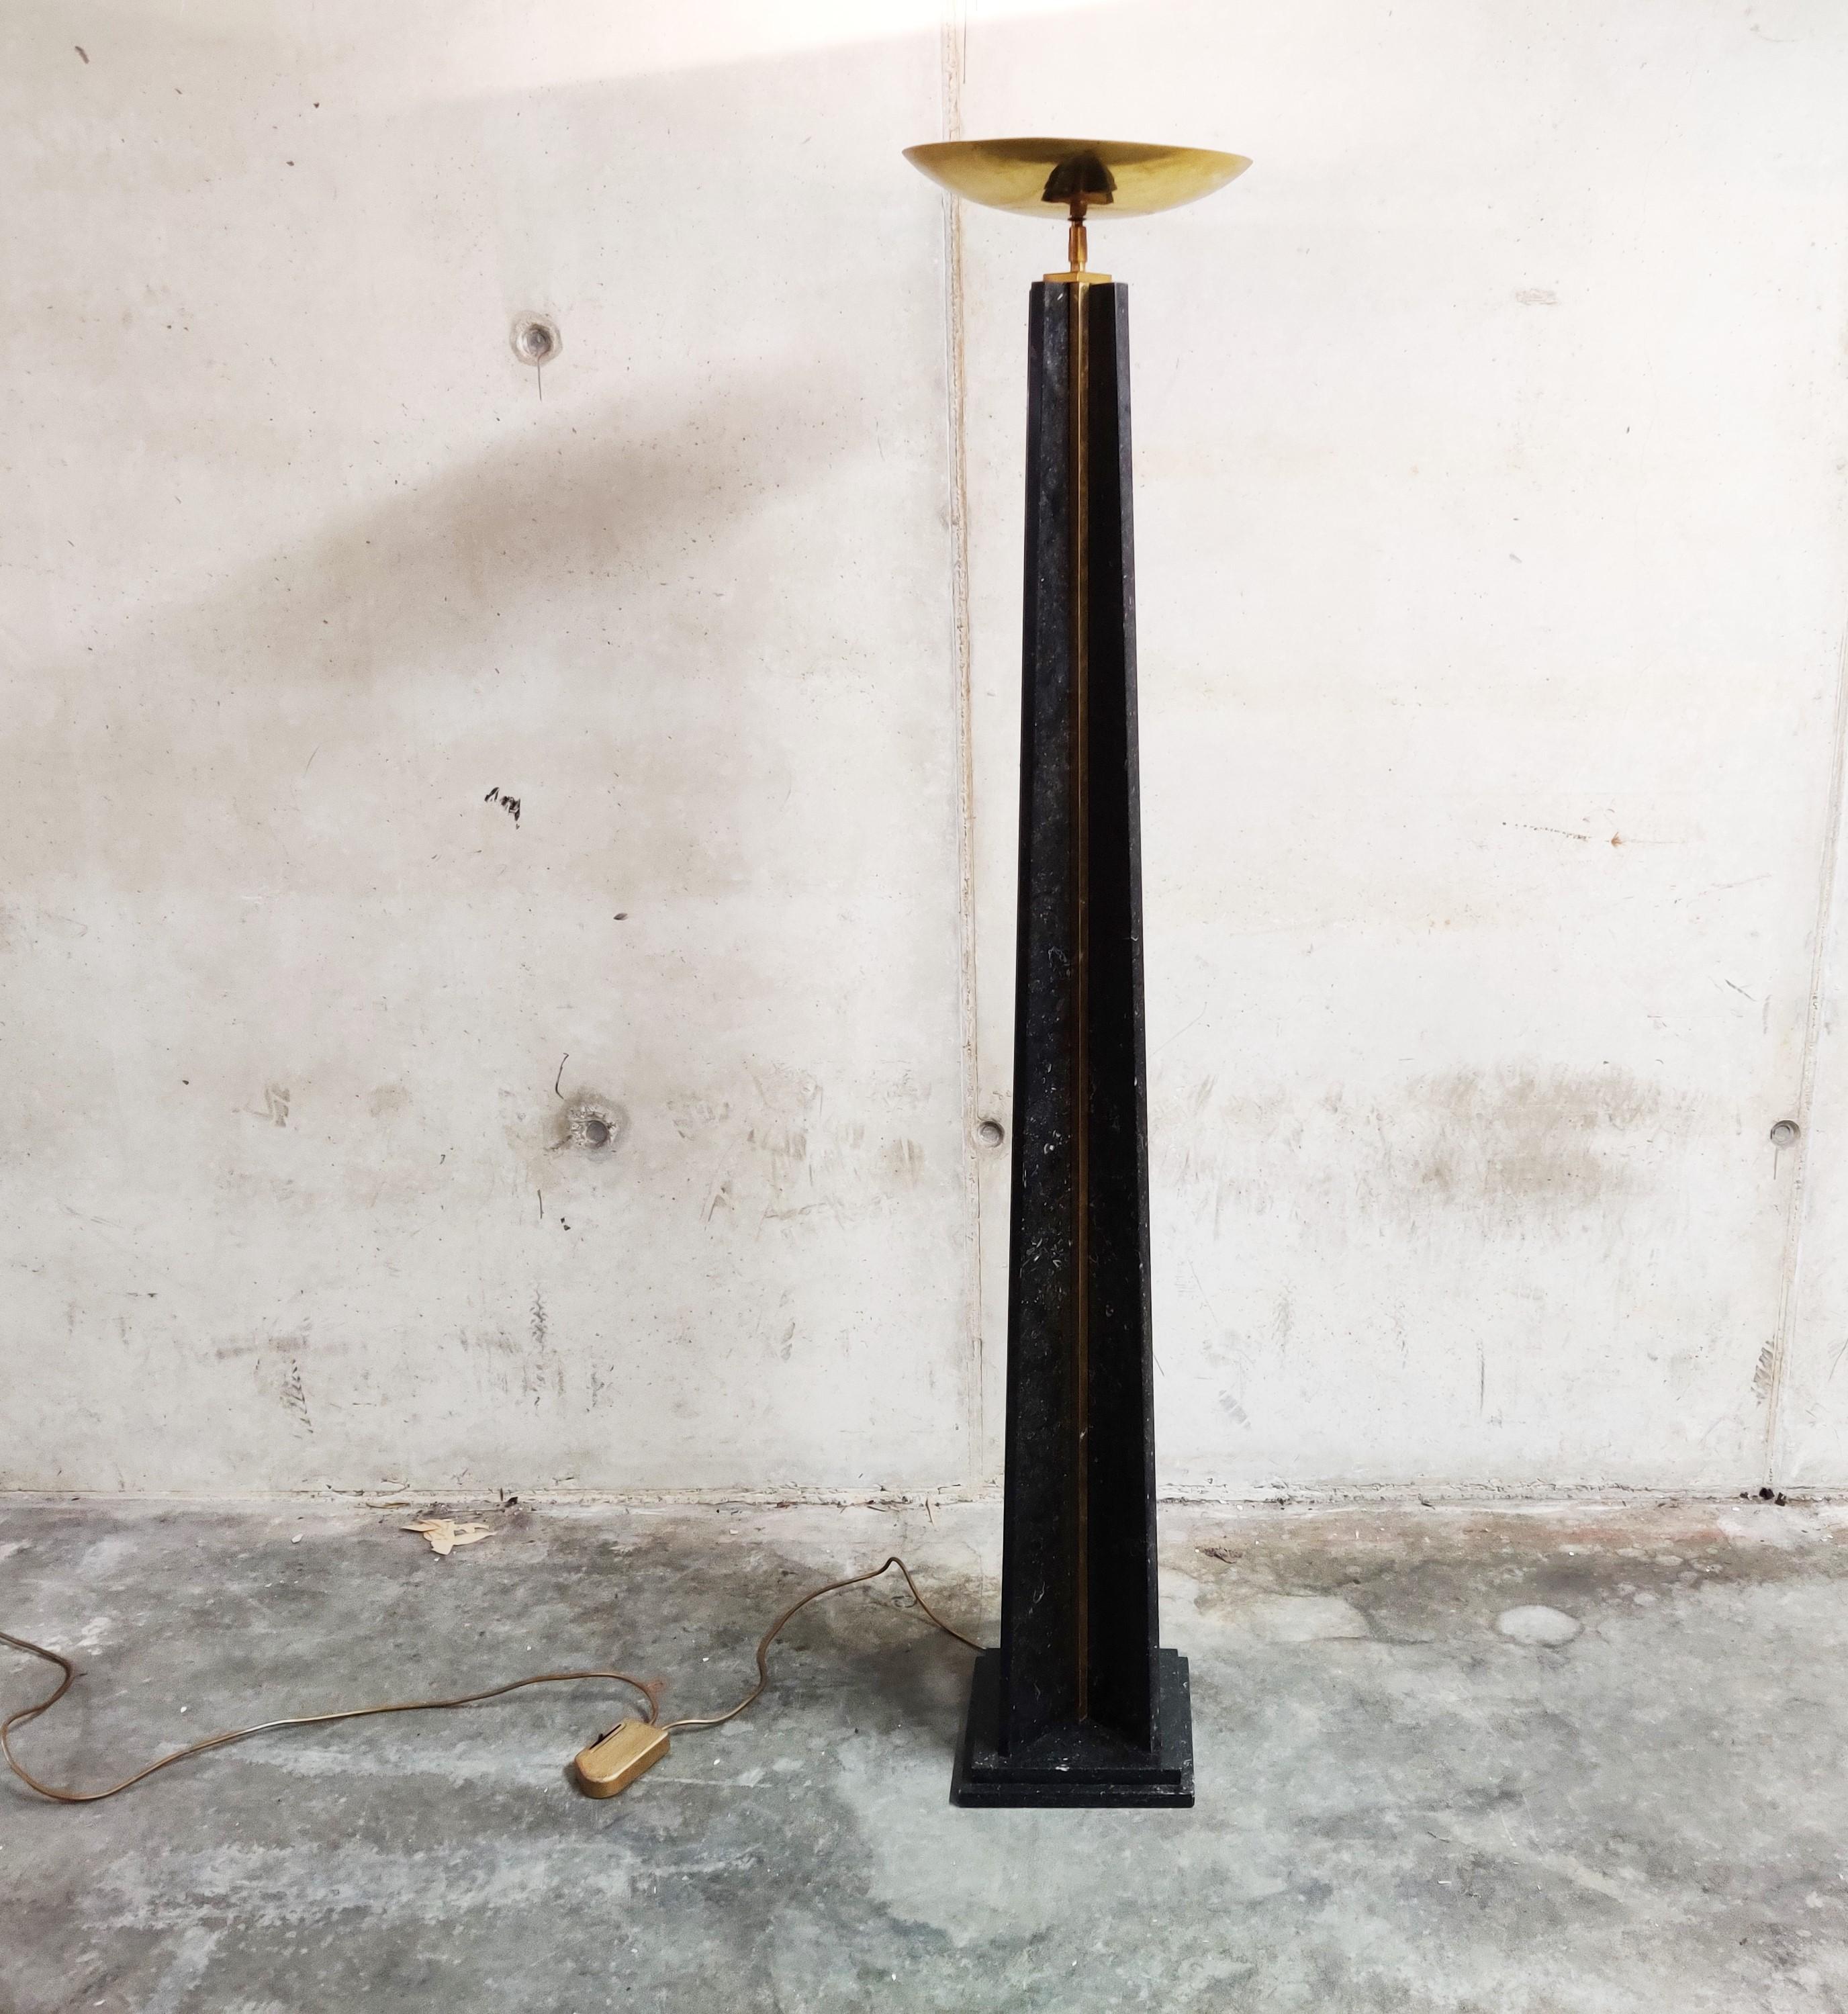 Large conical 'torchiere' floor lamp made from brass and black lacquered metal.

This uplighter floor lamp is dimmable.

Very small damage on the underside of the brass shade, barely visible and patina on the base.

The lacquer is in very good